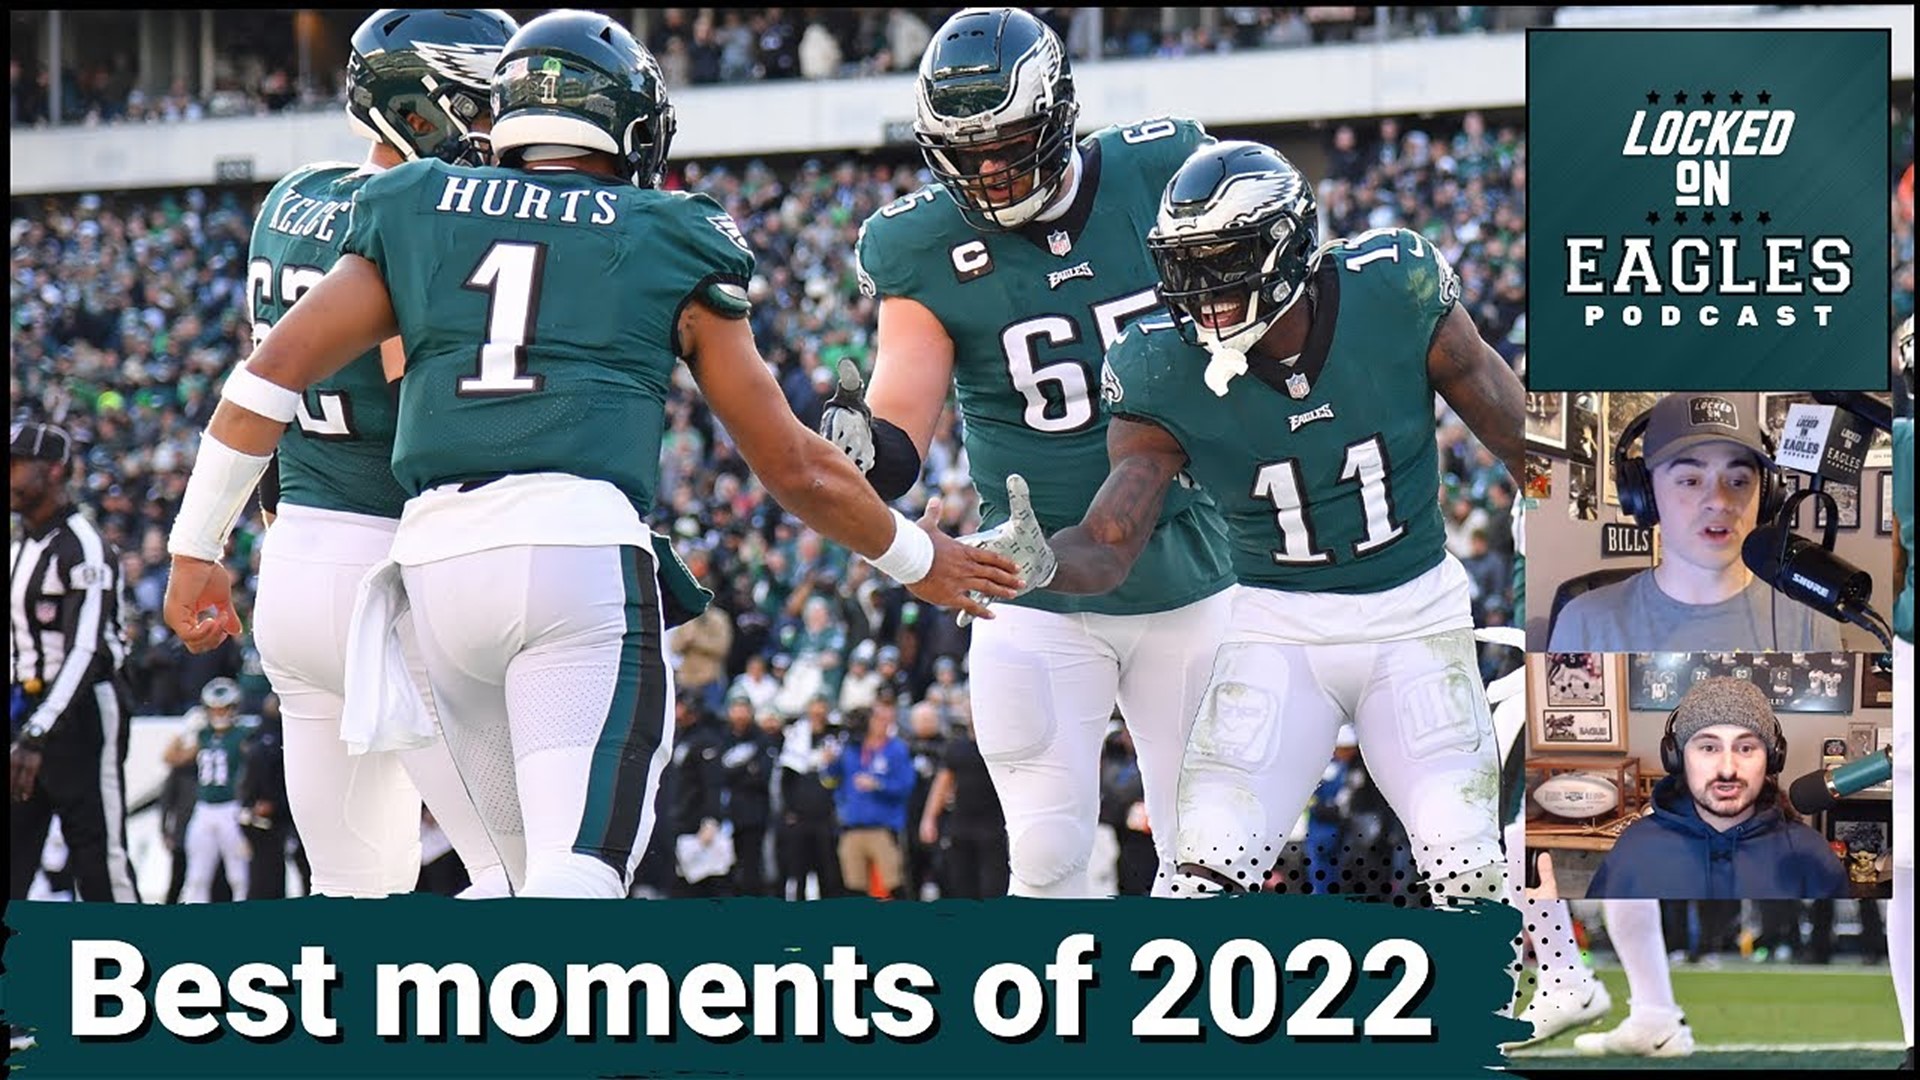 What were the best moments of the Philadelphia Eagles historic 2022 season? What were the best performances from Jalen Hurts?